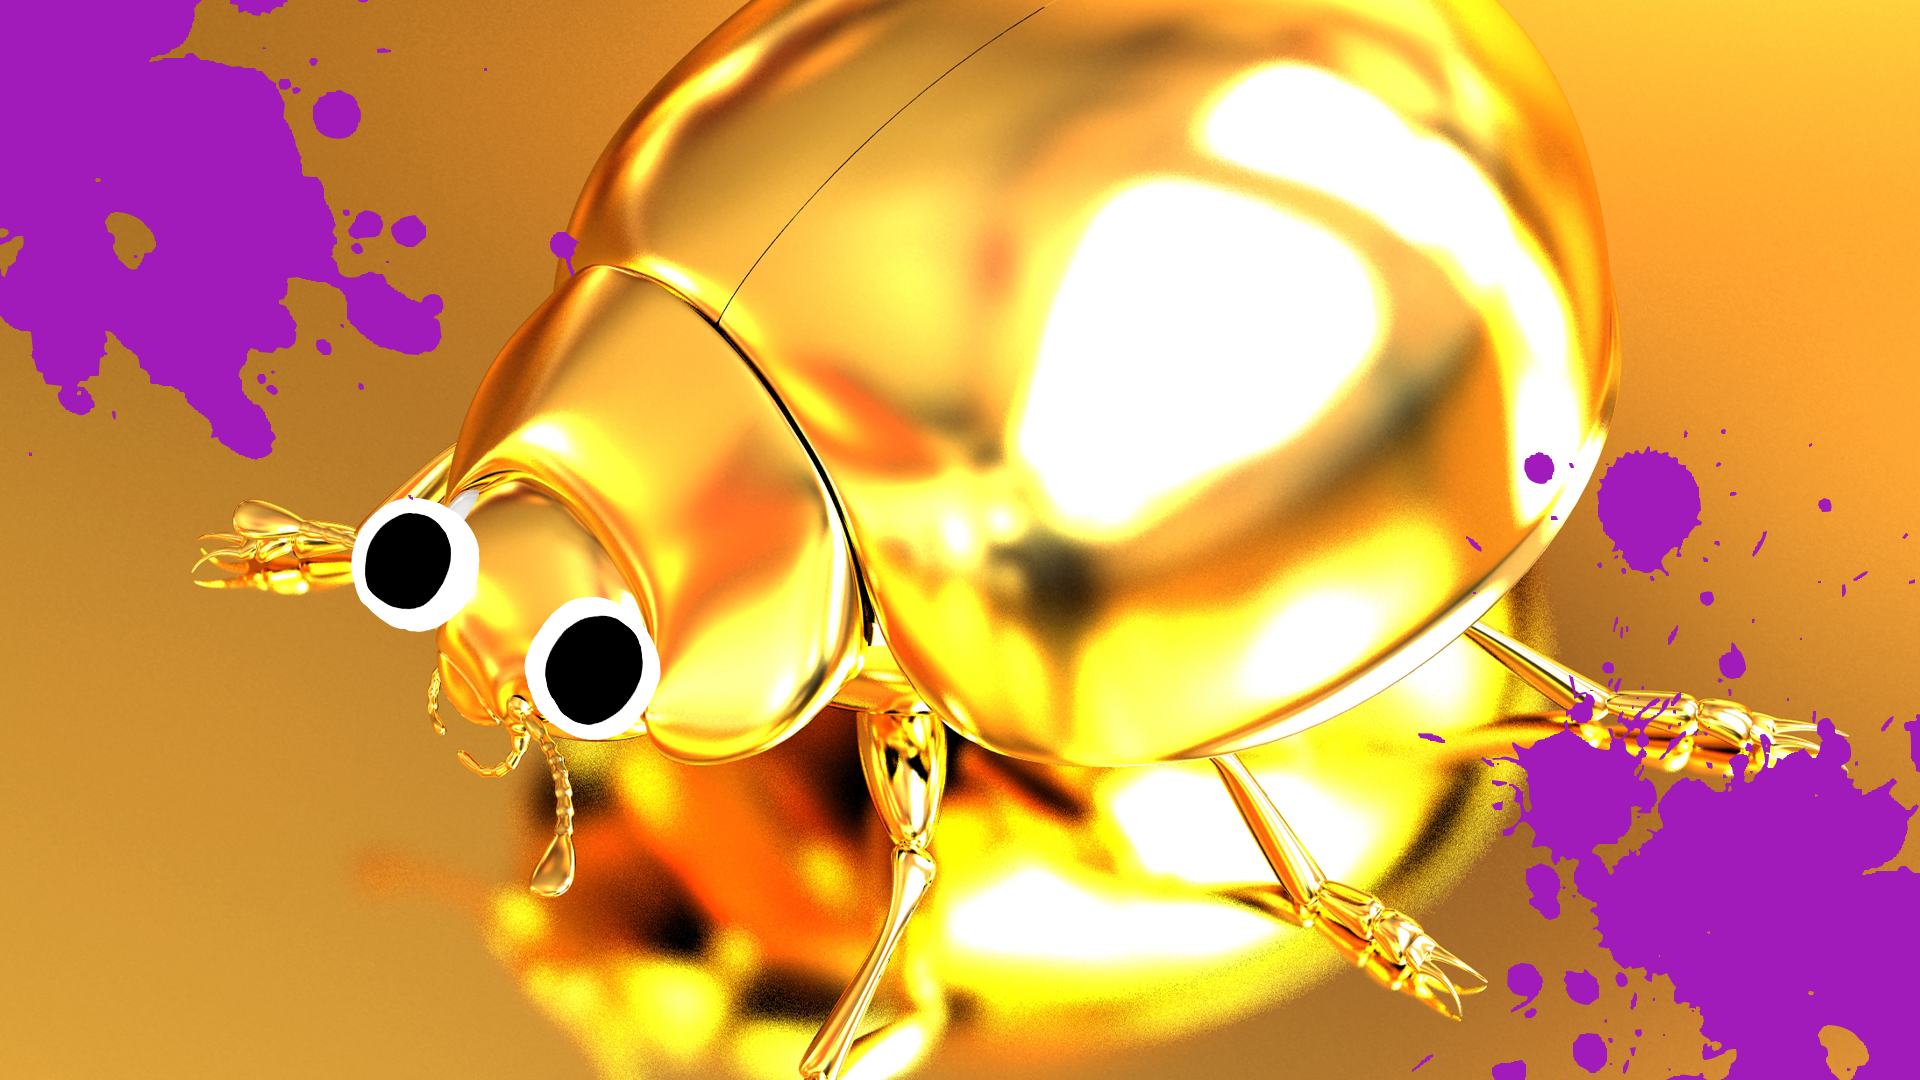 A gold bug and purple splats